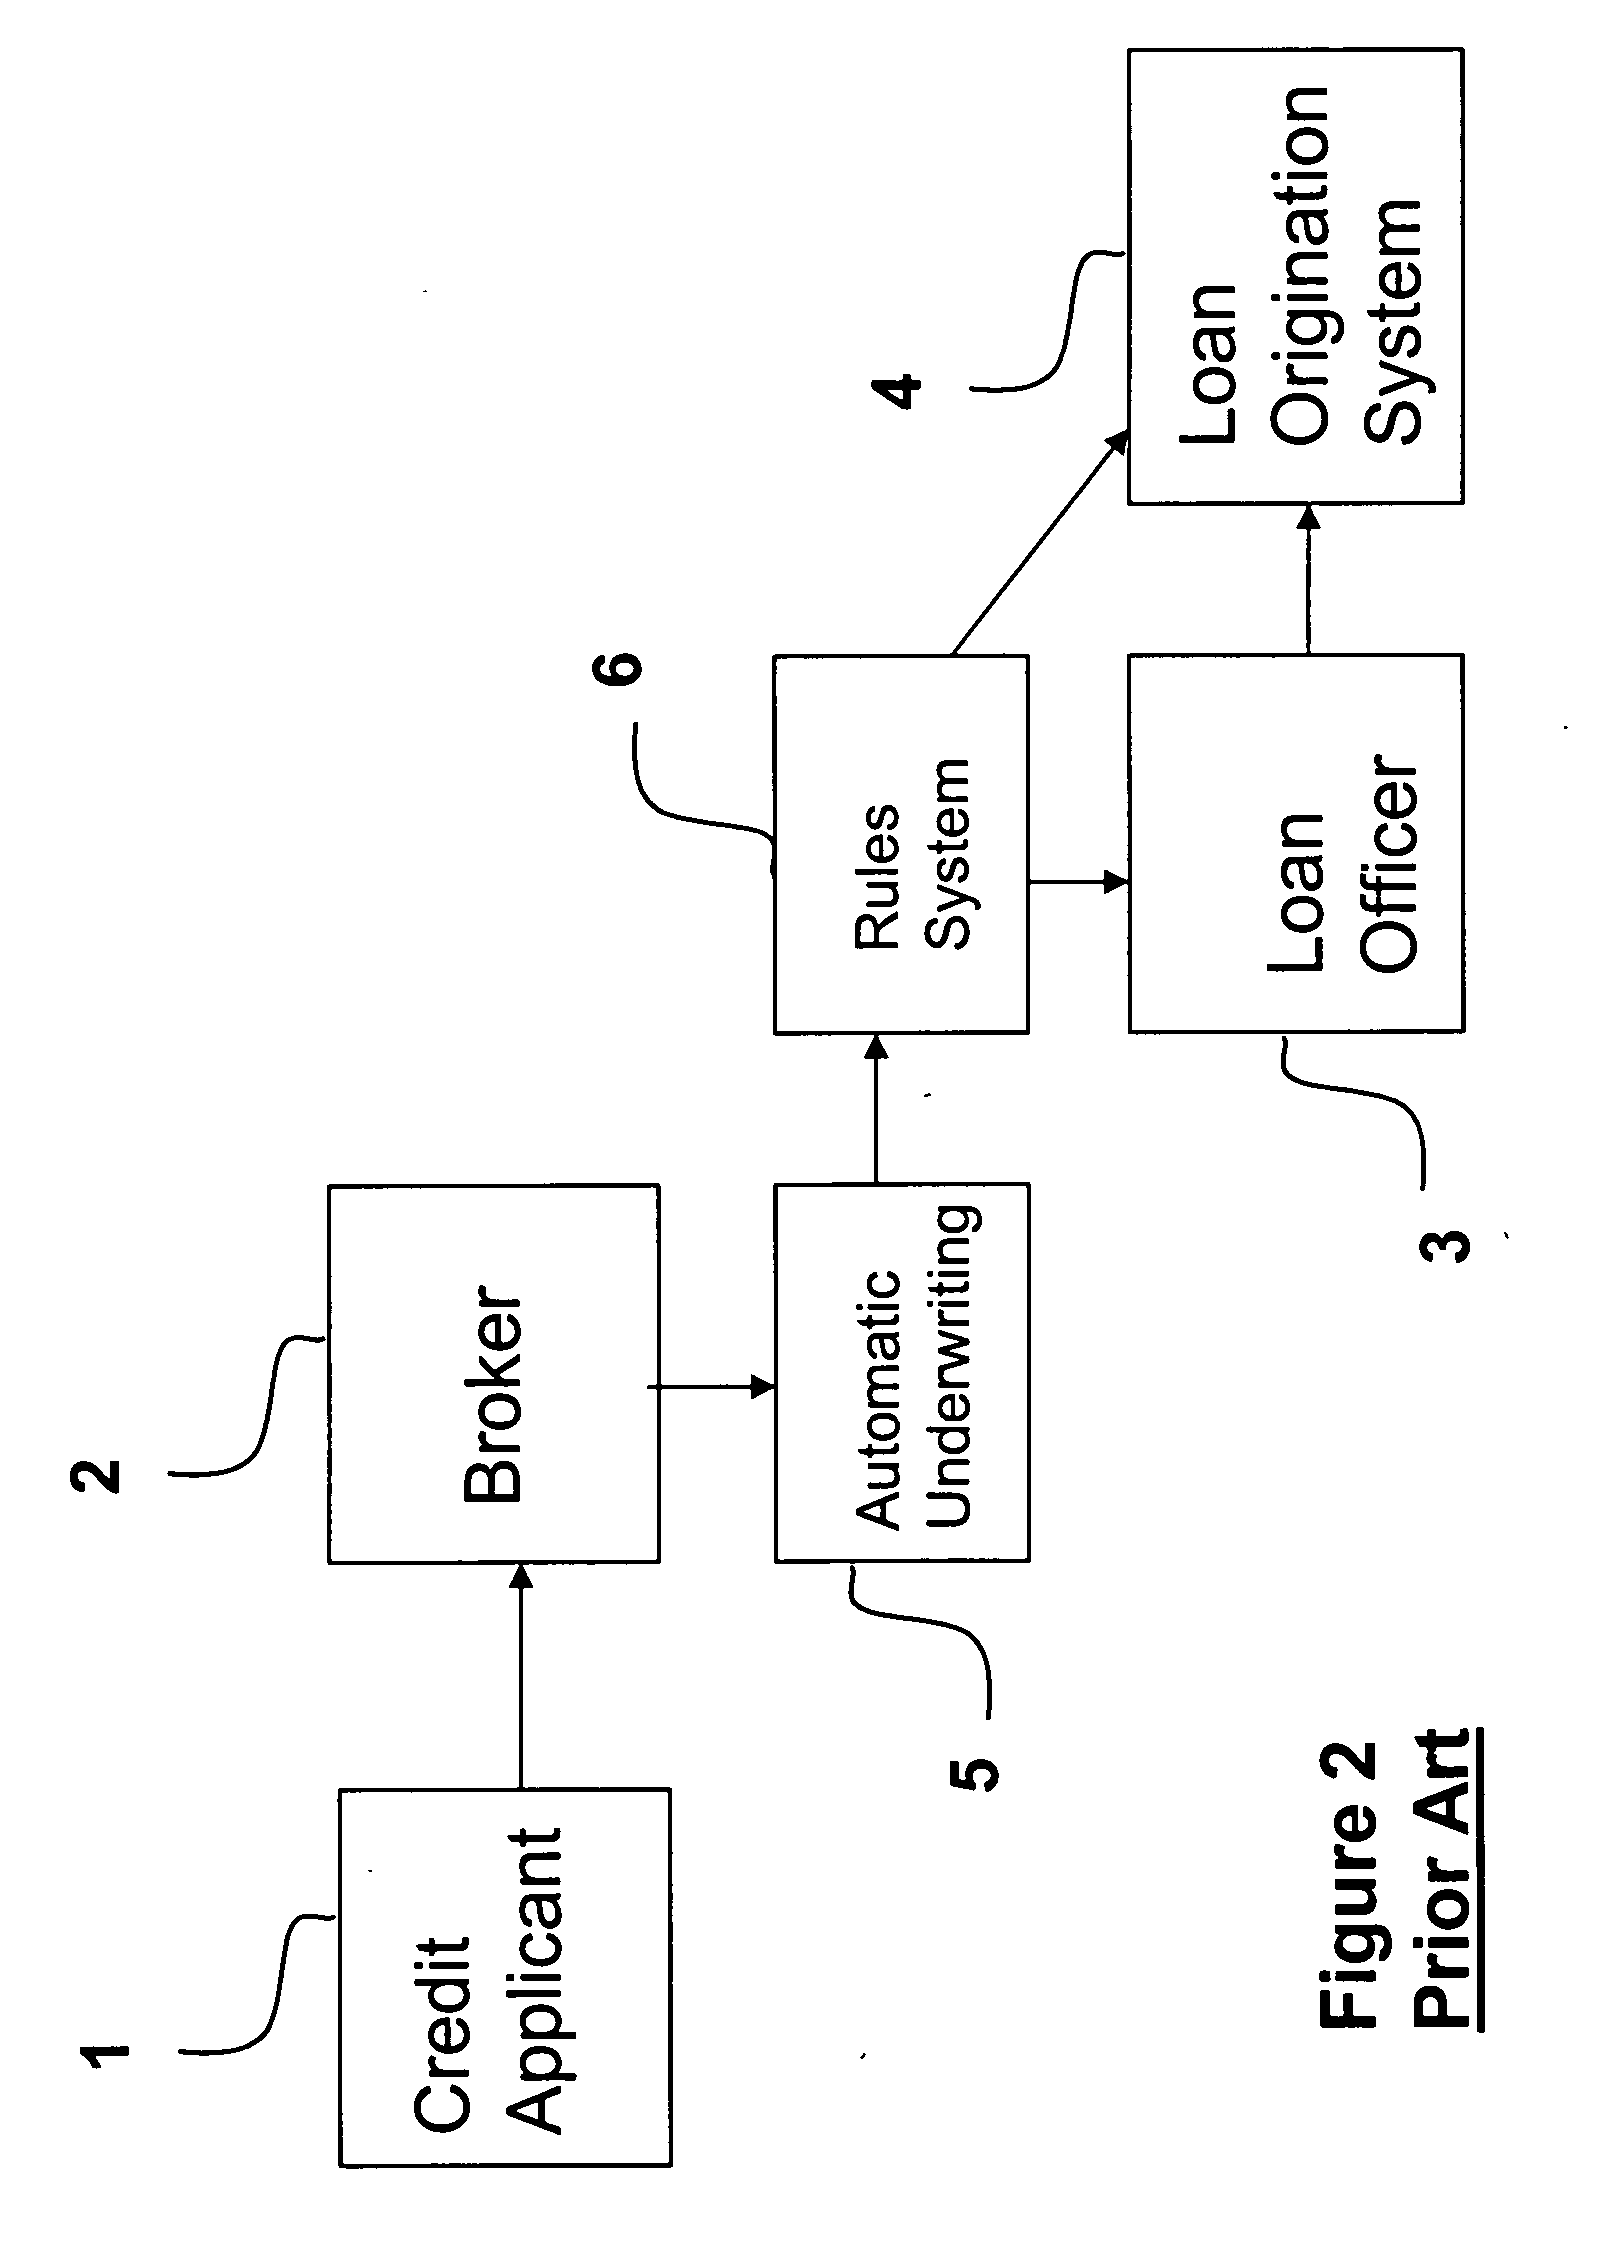 System for processing non-prime credit applications